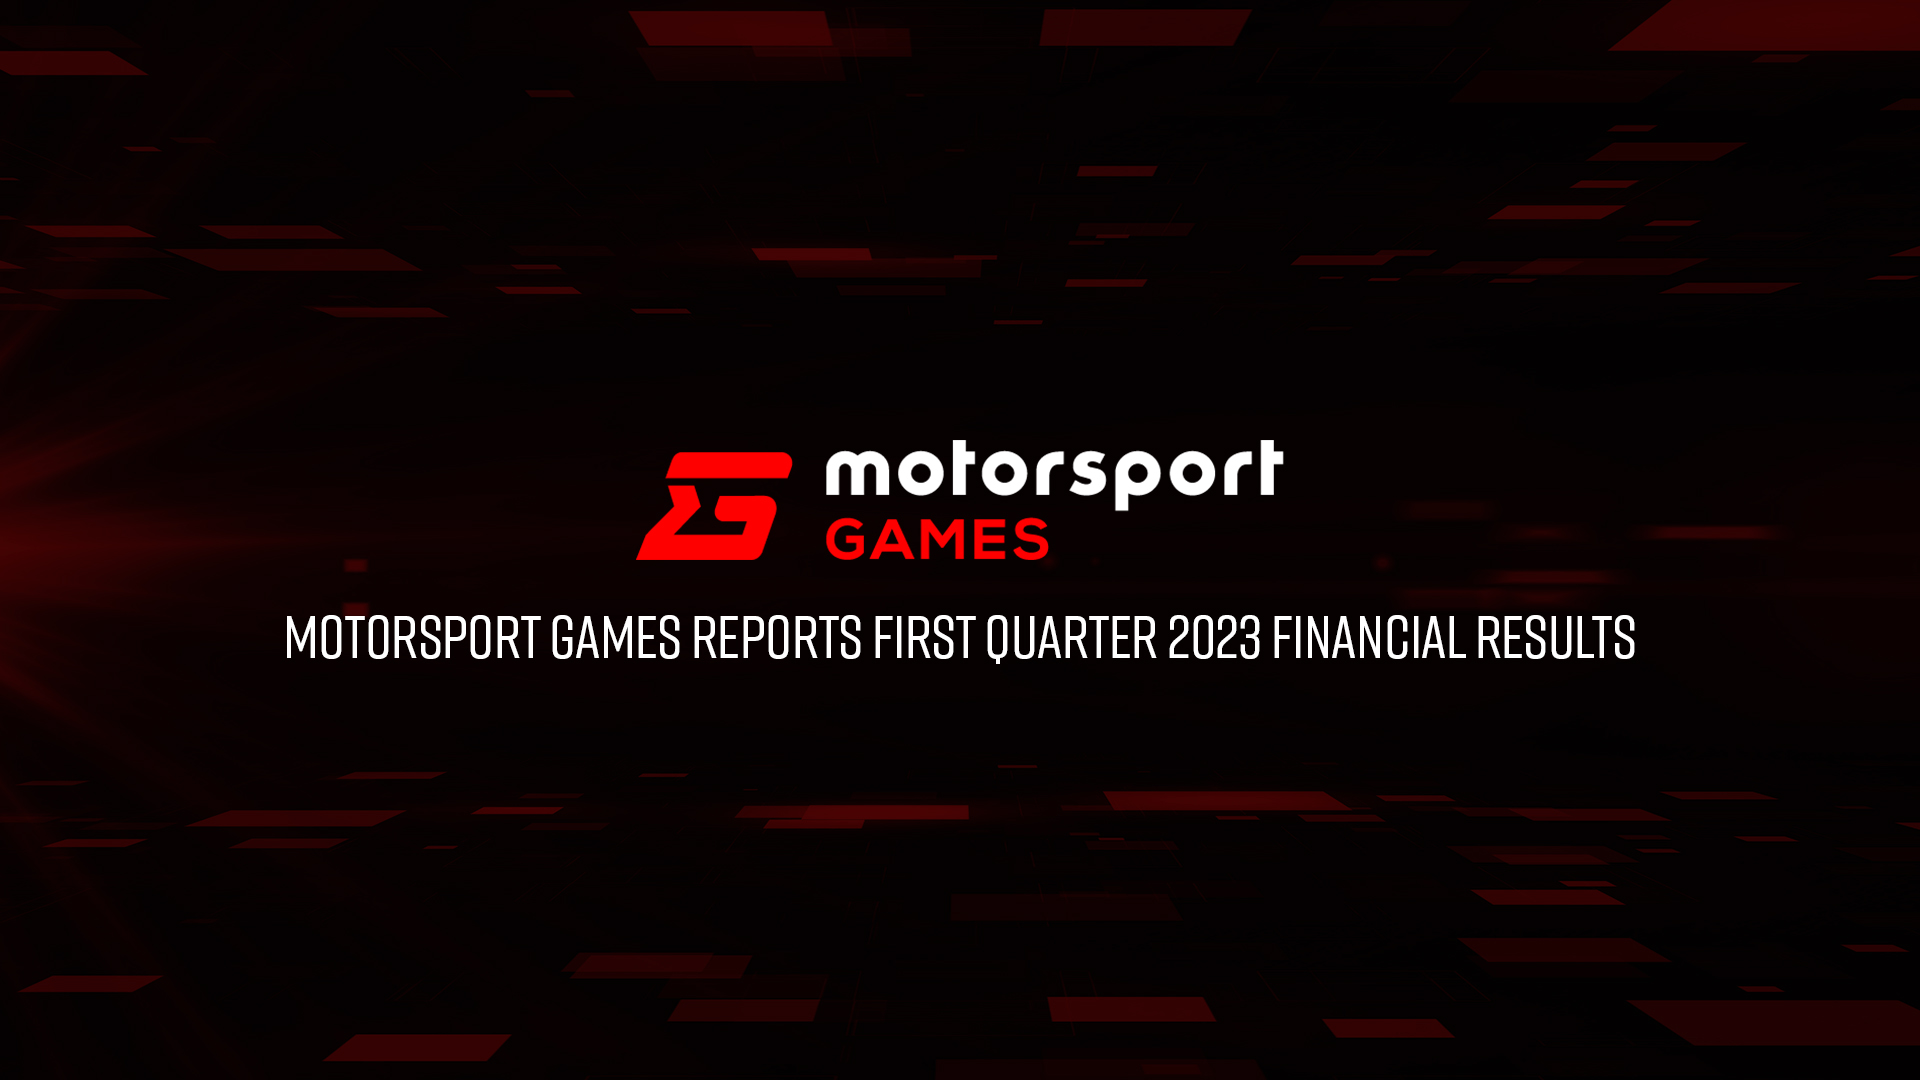 Motorsport Games Reports Q1 2023 Financial Results